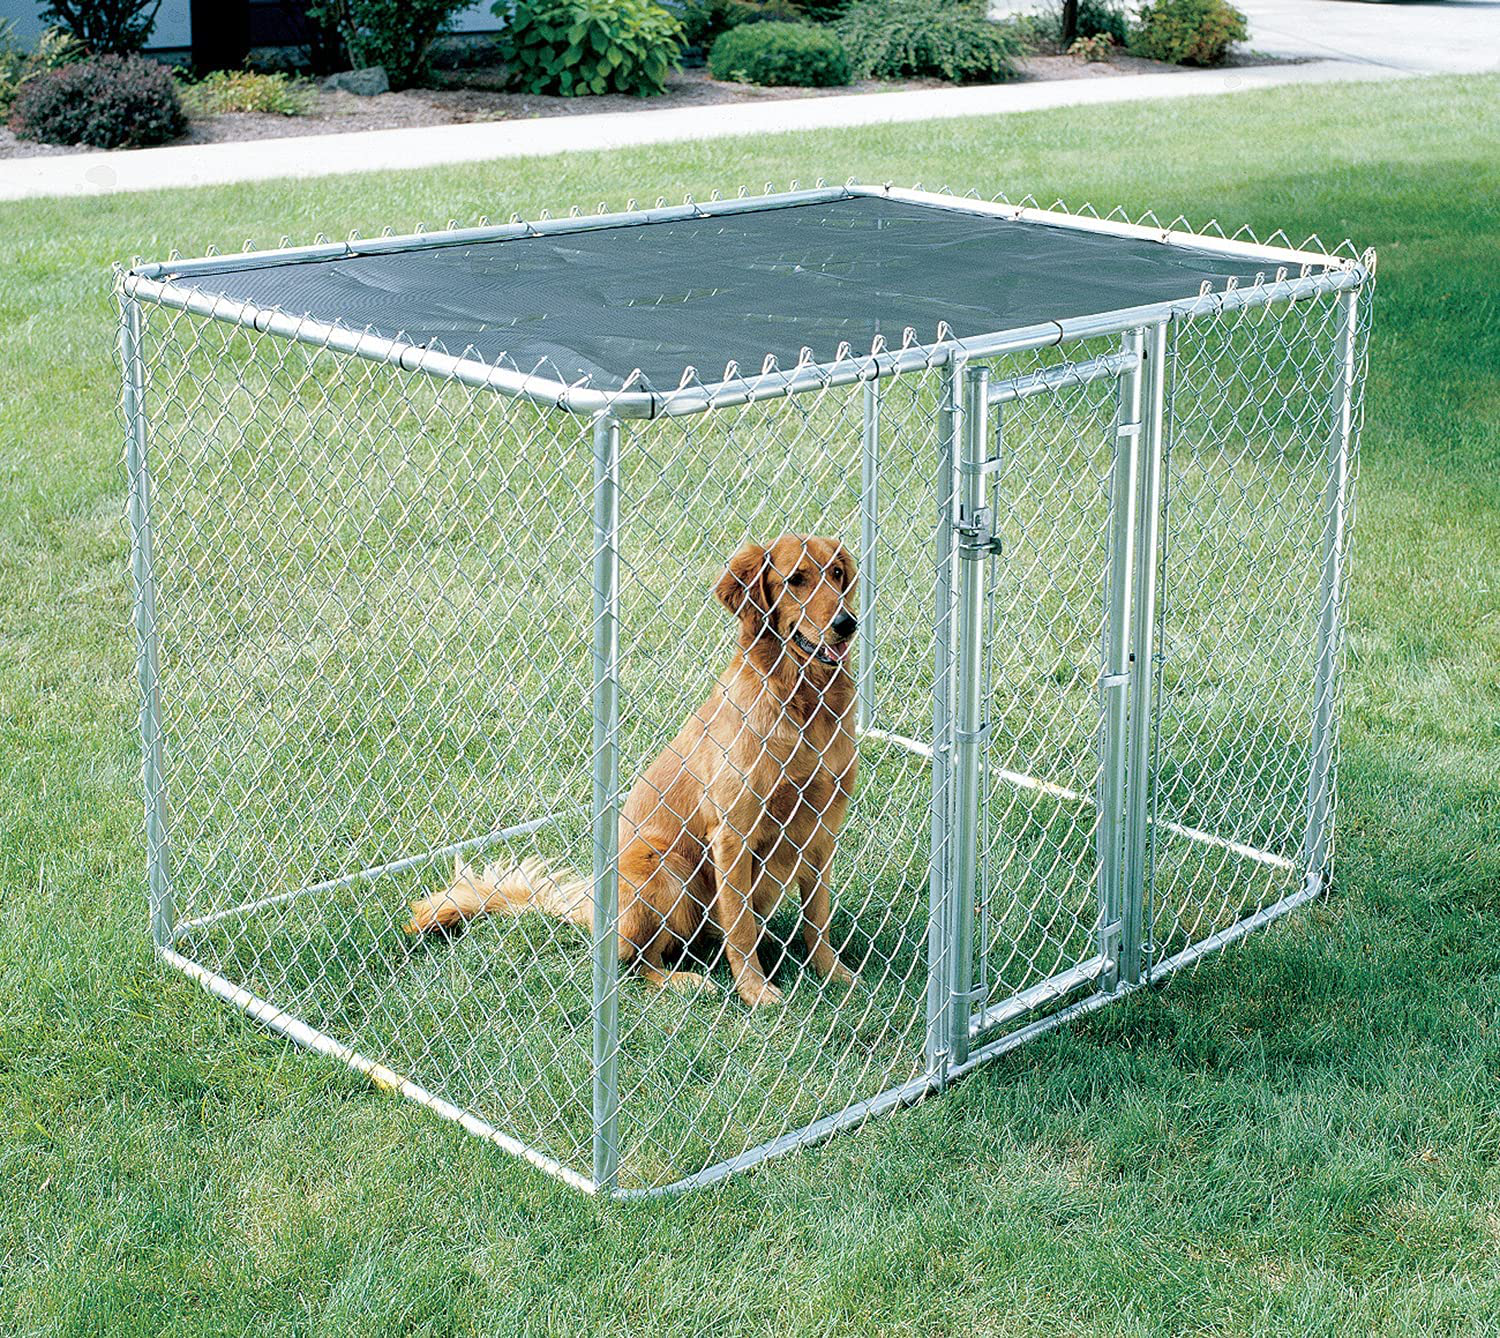 Midwest Homes for Pets K9 Dog Kennel | Four Outdoor Dog Kennel W/Free Sunscreen | Durable Galvanized Steel Dog Kennel Includes a 1-Year Manufacturer'S Warranty Animals & Pet Supplies > Pet Supplies > Dog Supplies > Dog Kennels & Runs MidWest Homes for Pets   